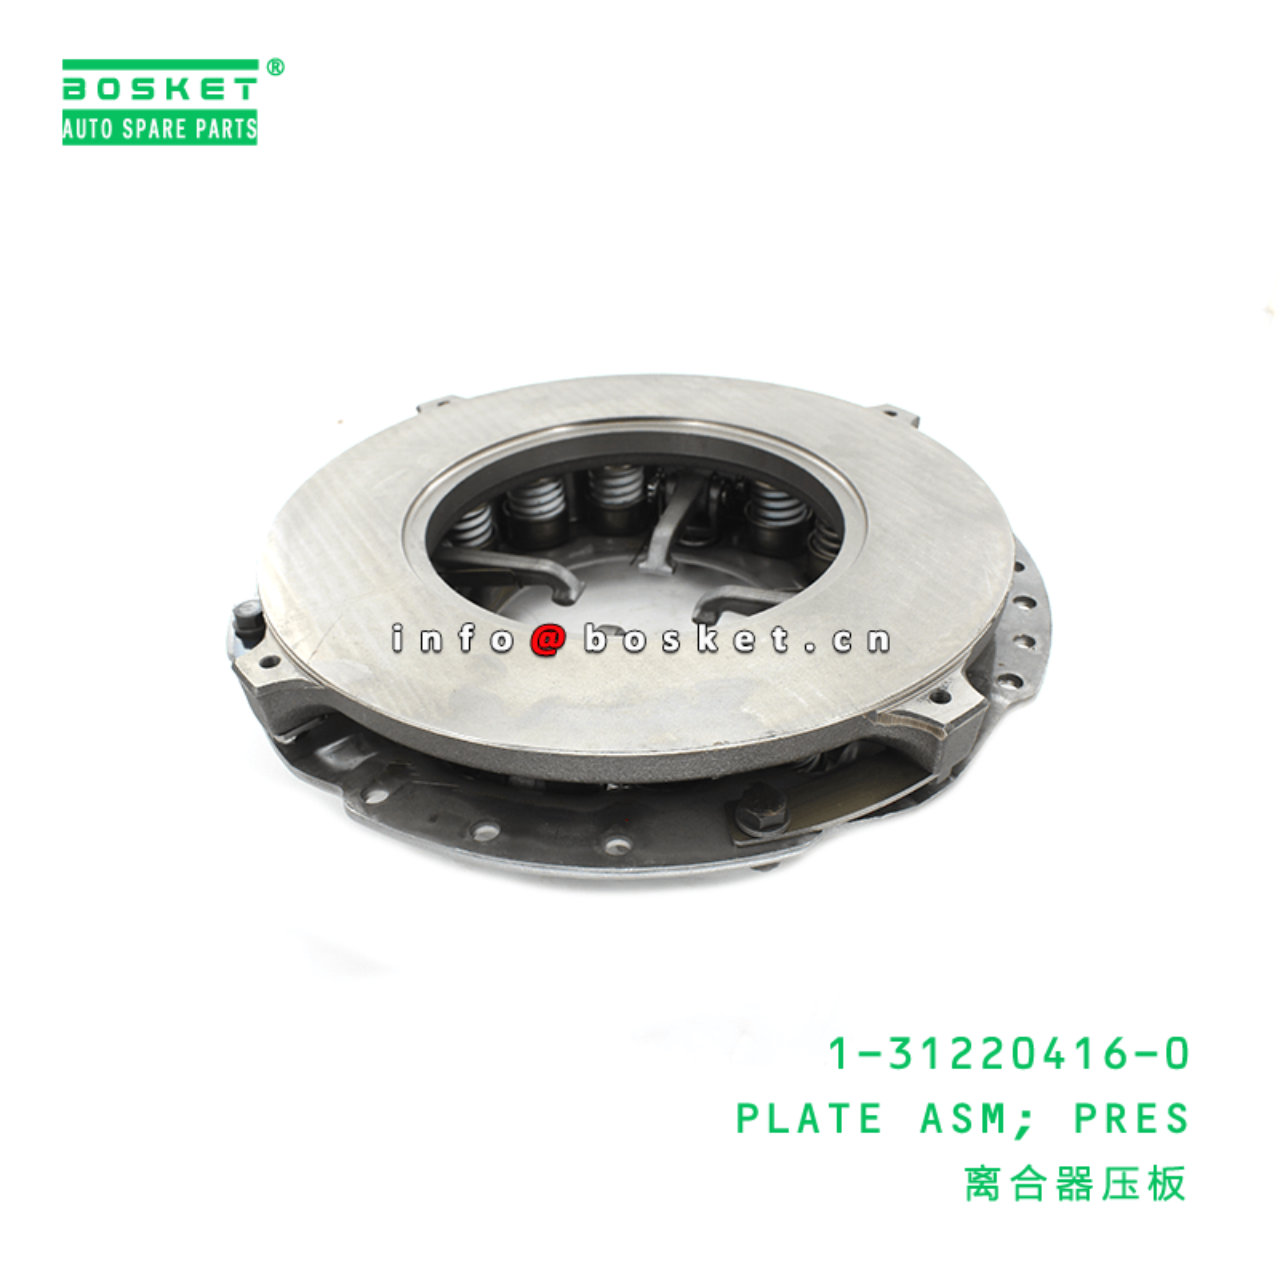 1-31220416-0 Pres Plate Assembly Suitable for ISUZU F Series Truck 1312204160